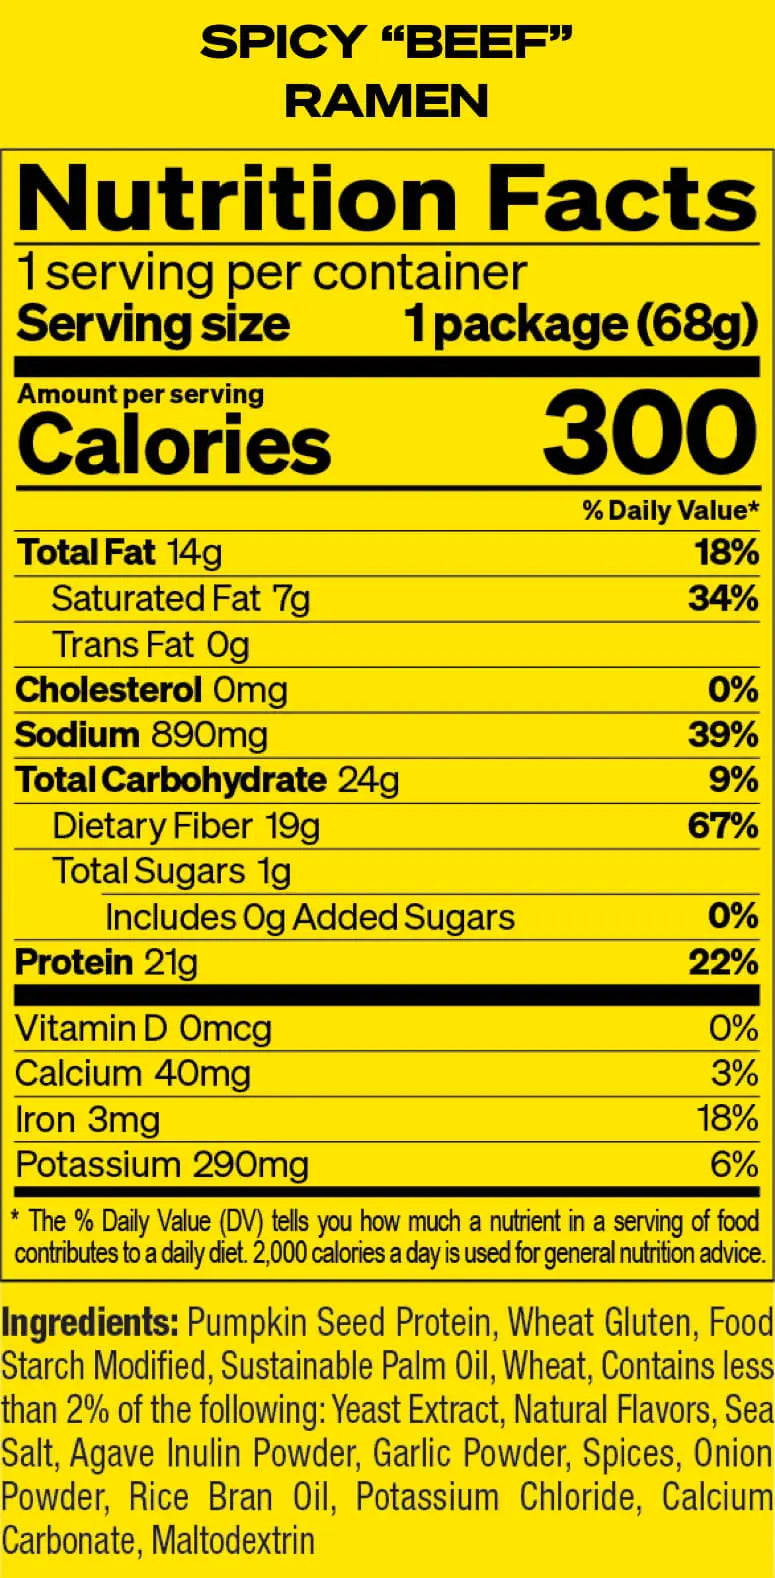 Spicy Beef Nutrition Facts